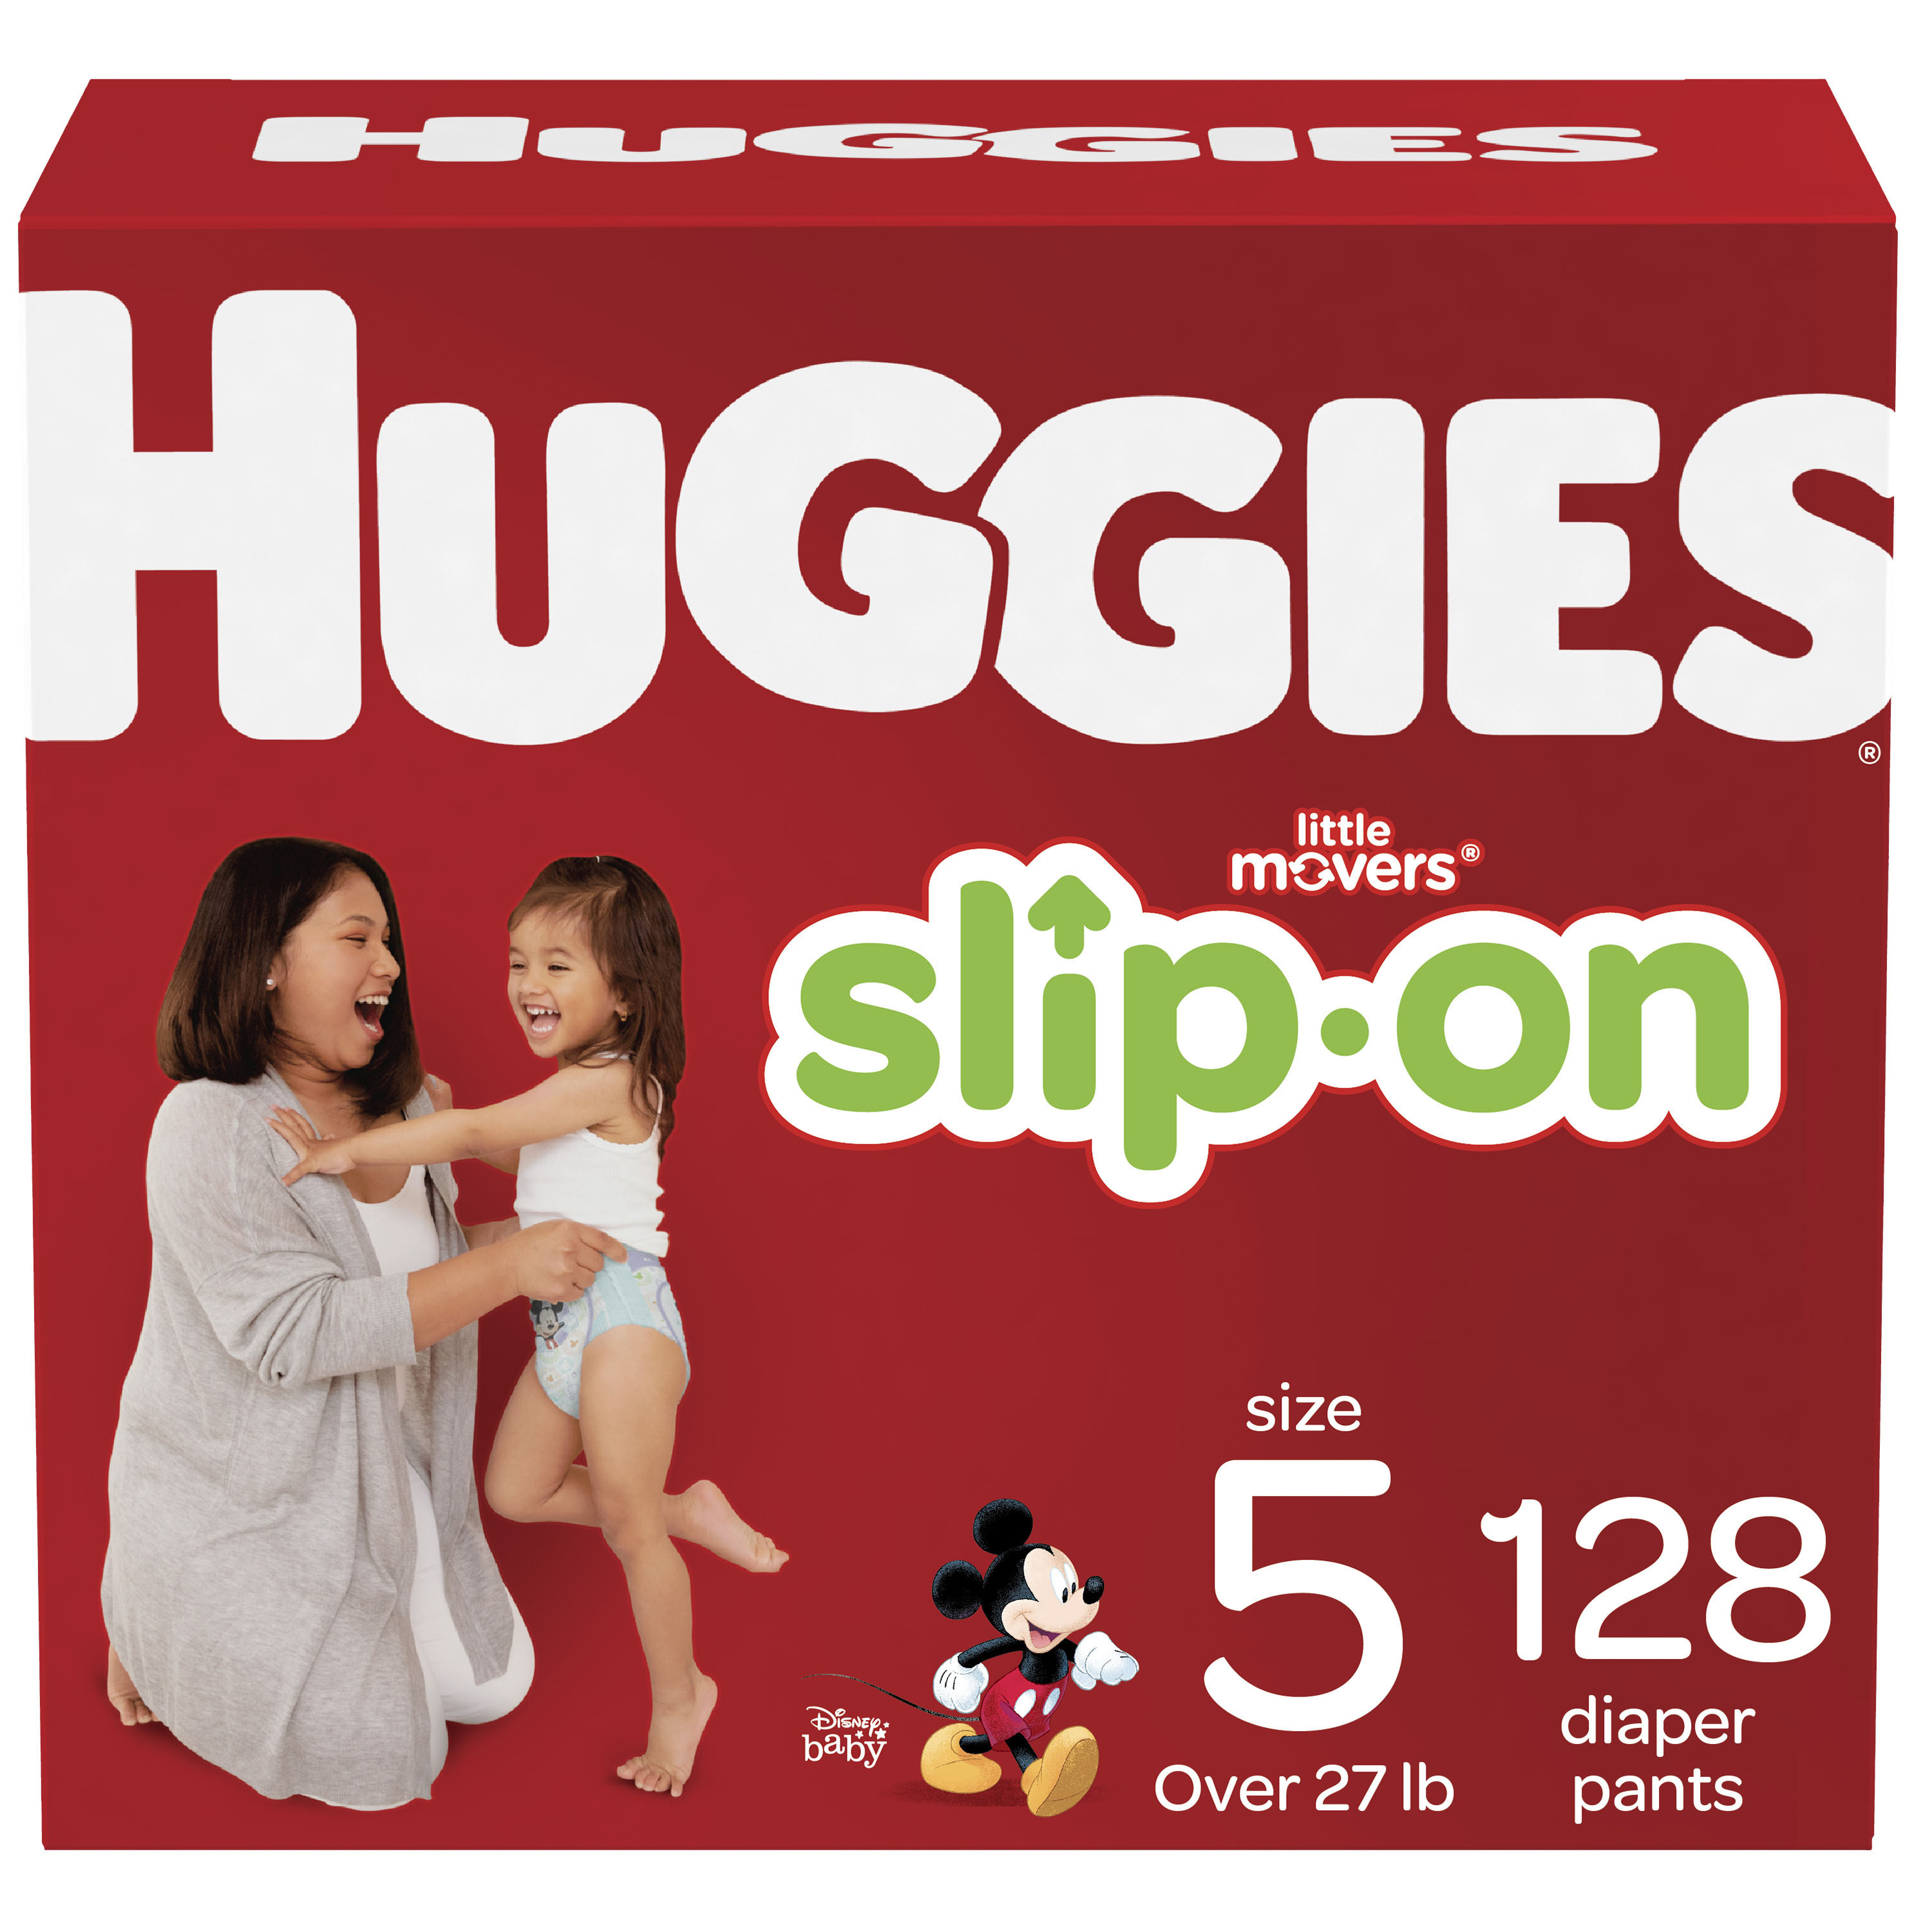 Huggies Little Movers Slip-On Diaper Pants, Size 5, 128 Ct - image 4 of 9